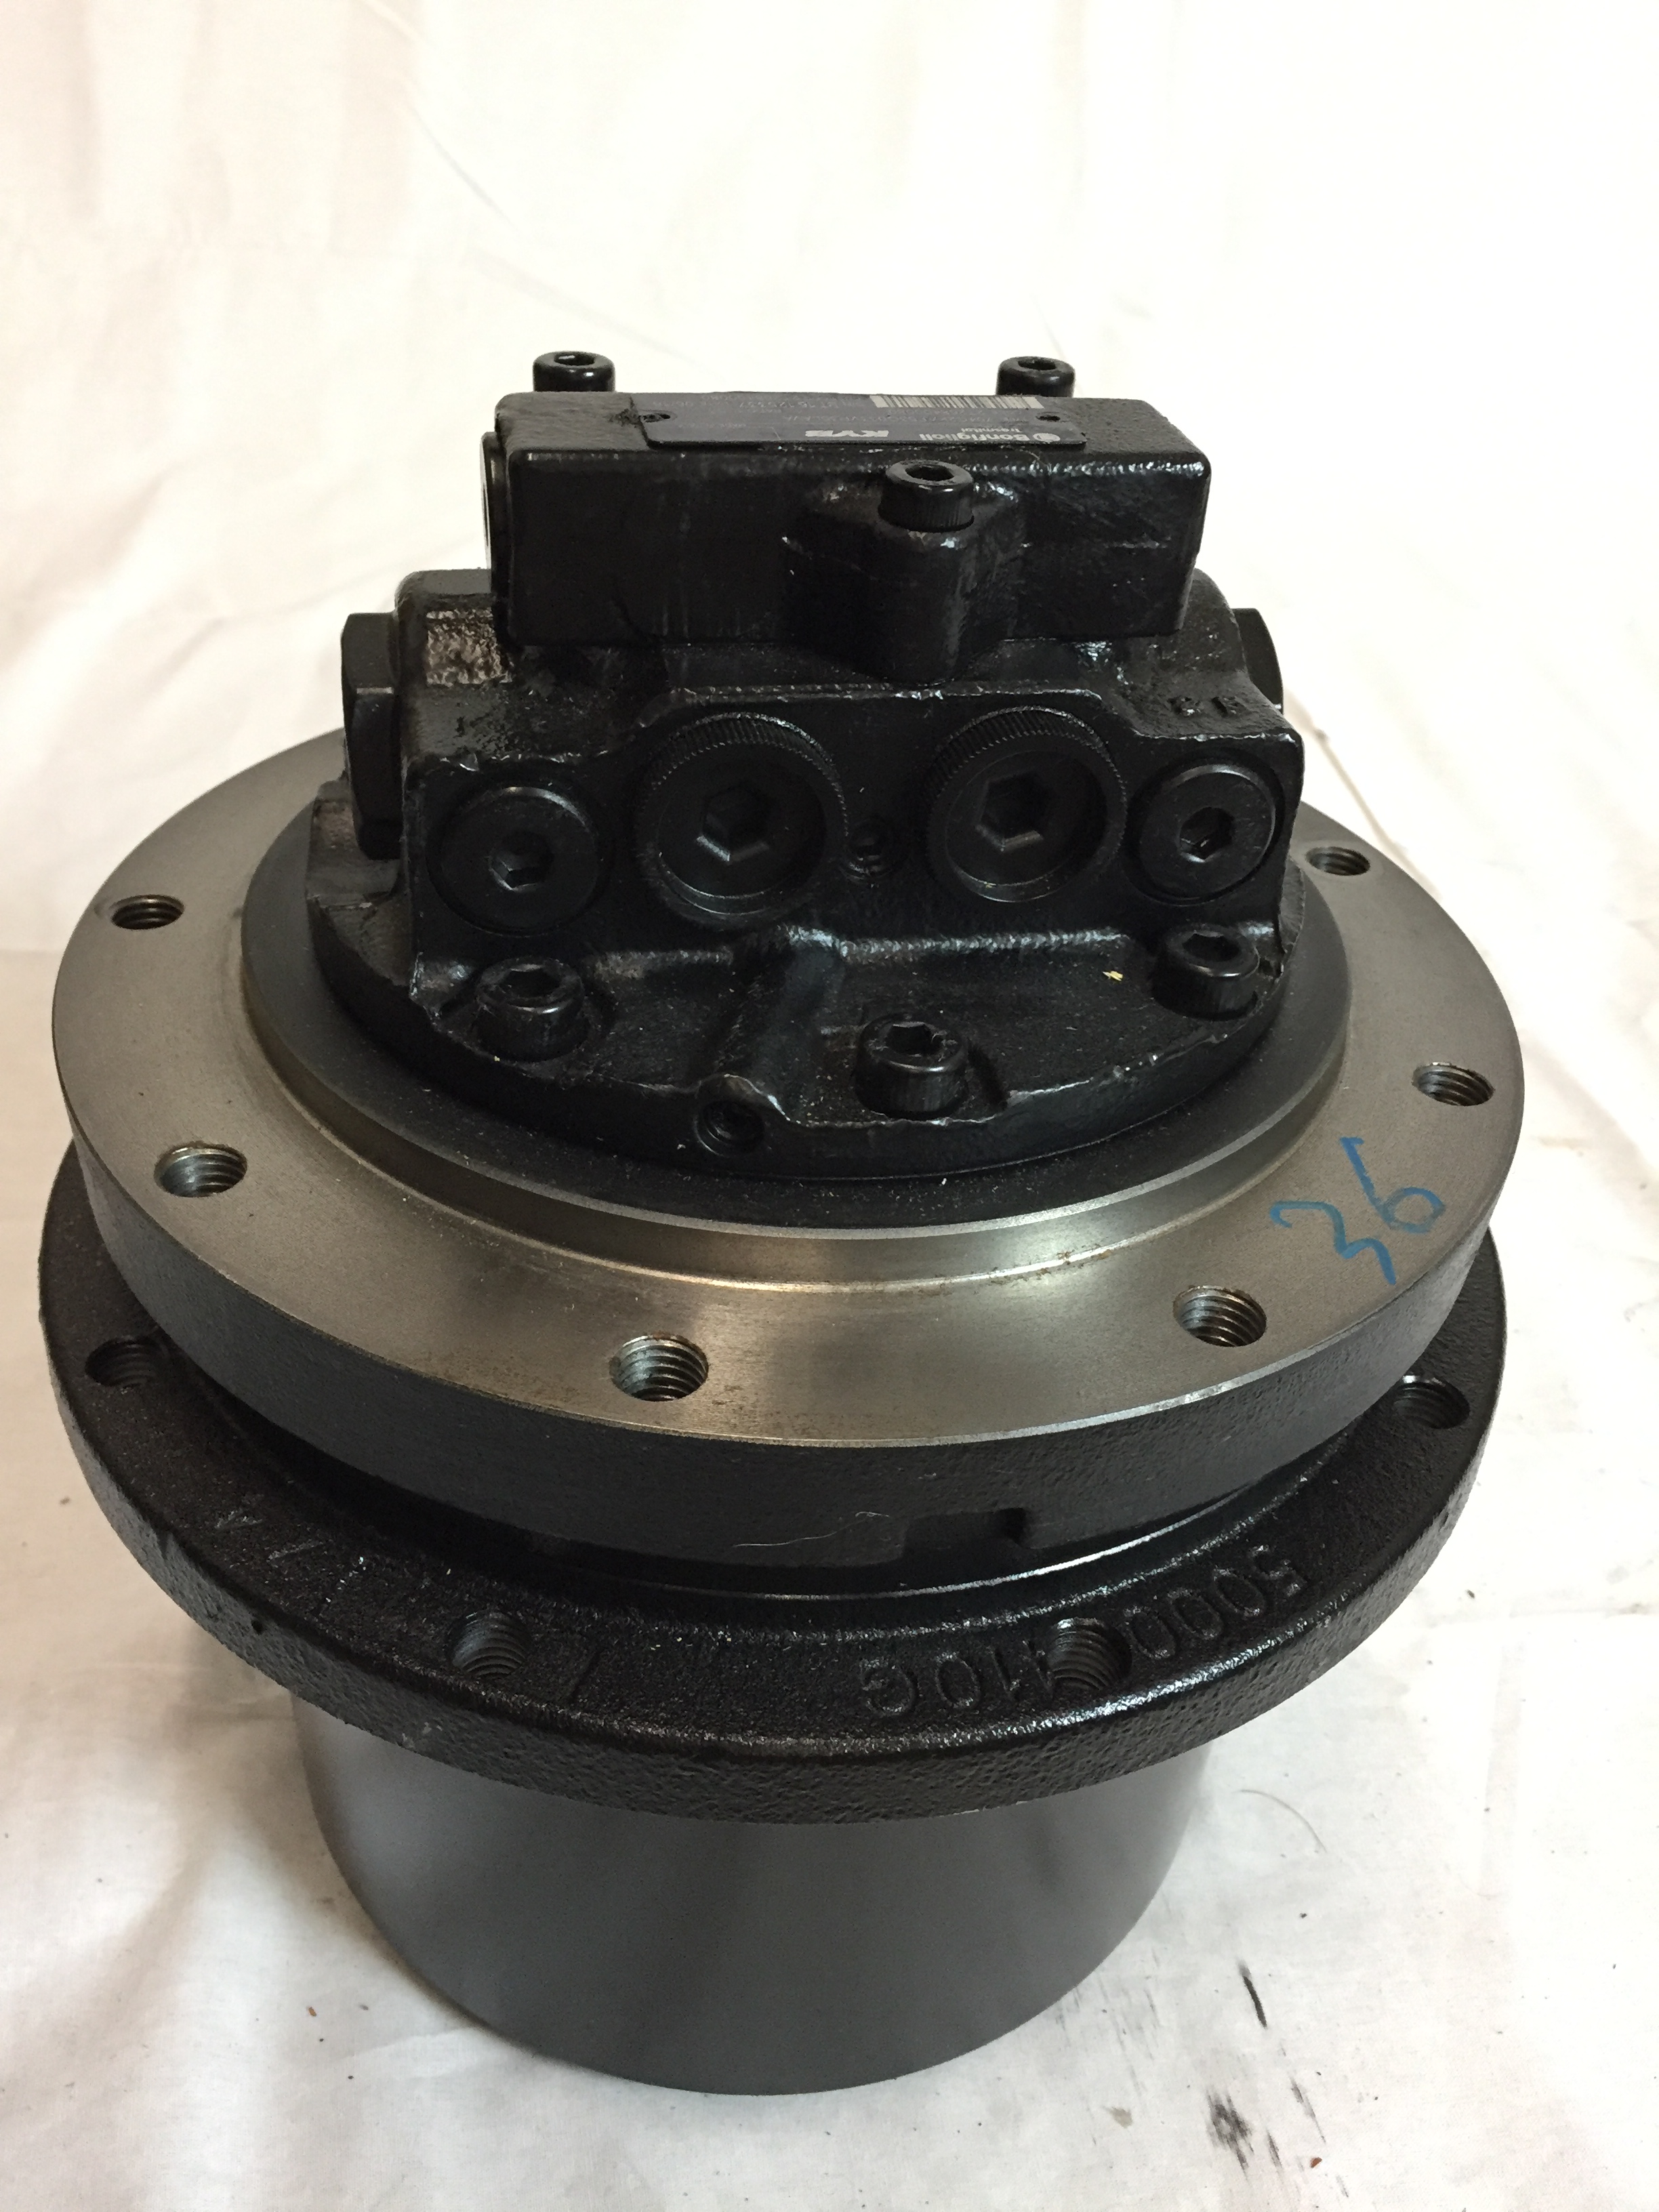 ZX60 Complete Final Drive (Planetary/Travel Drive) with Motor (LOW S/N 244001-274999) #4628892,0922101